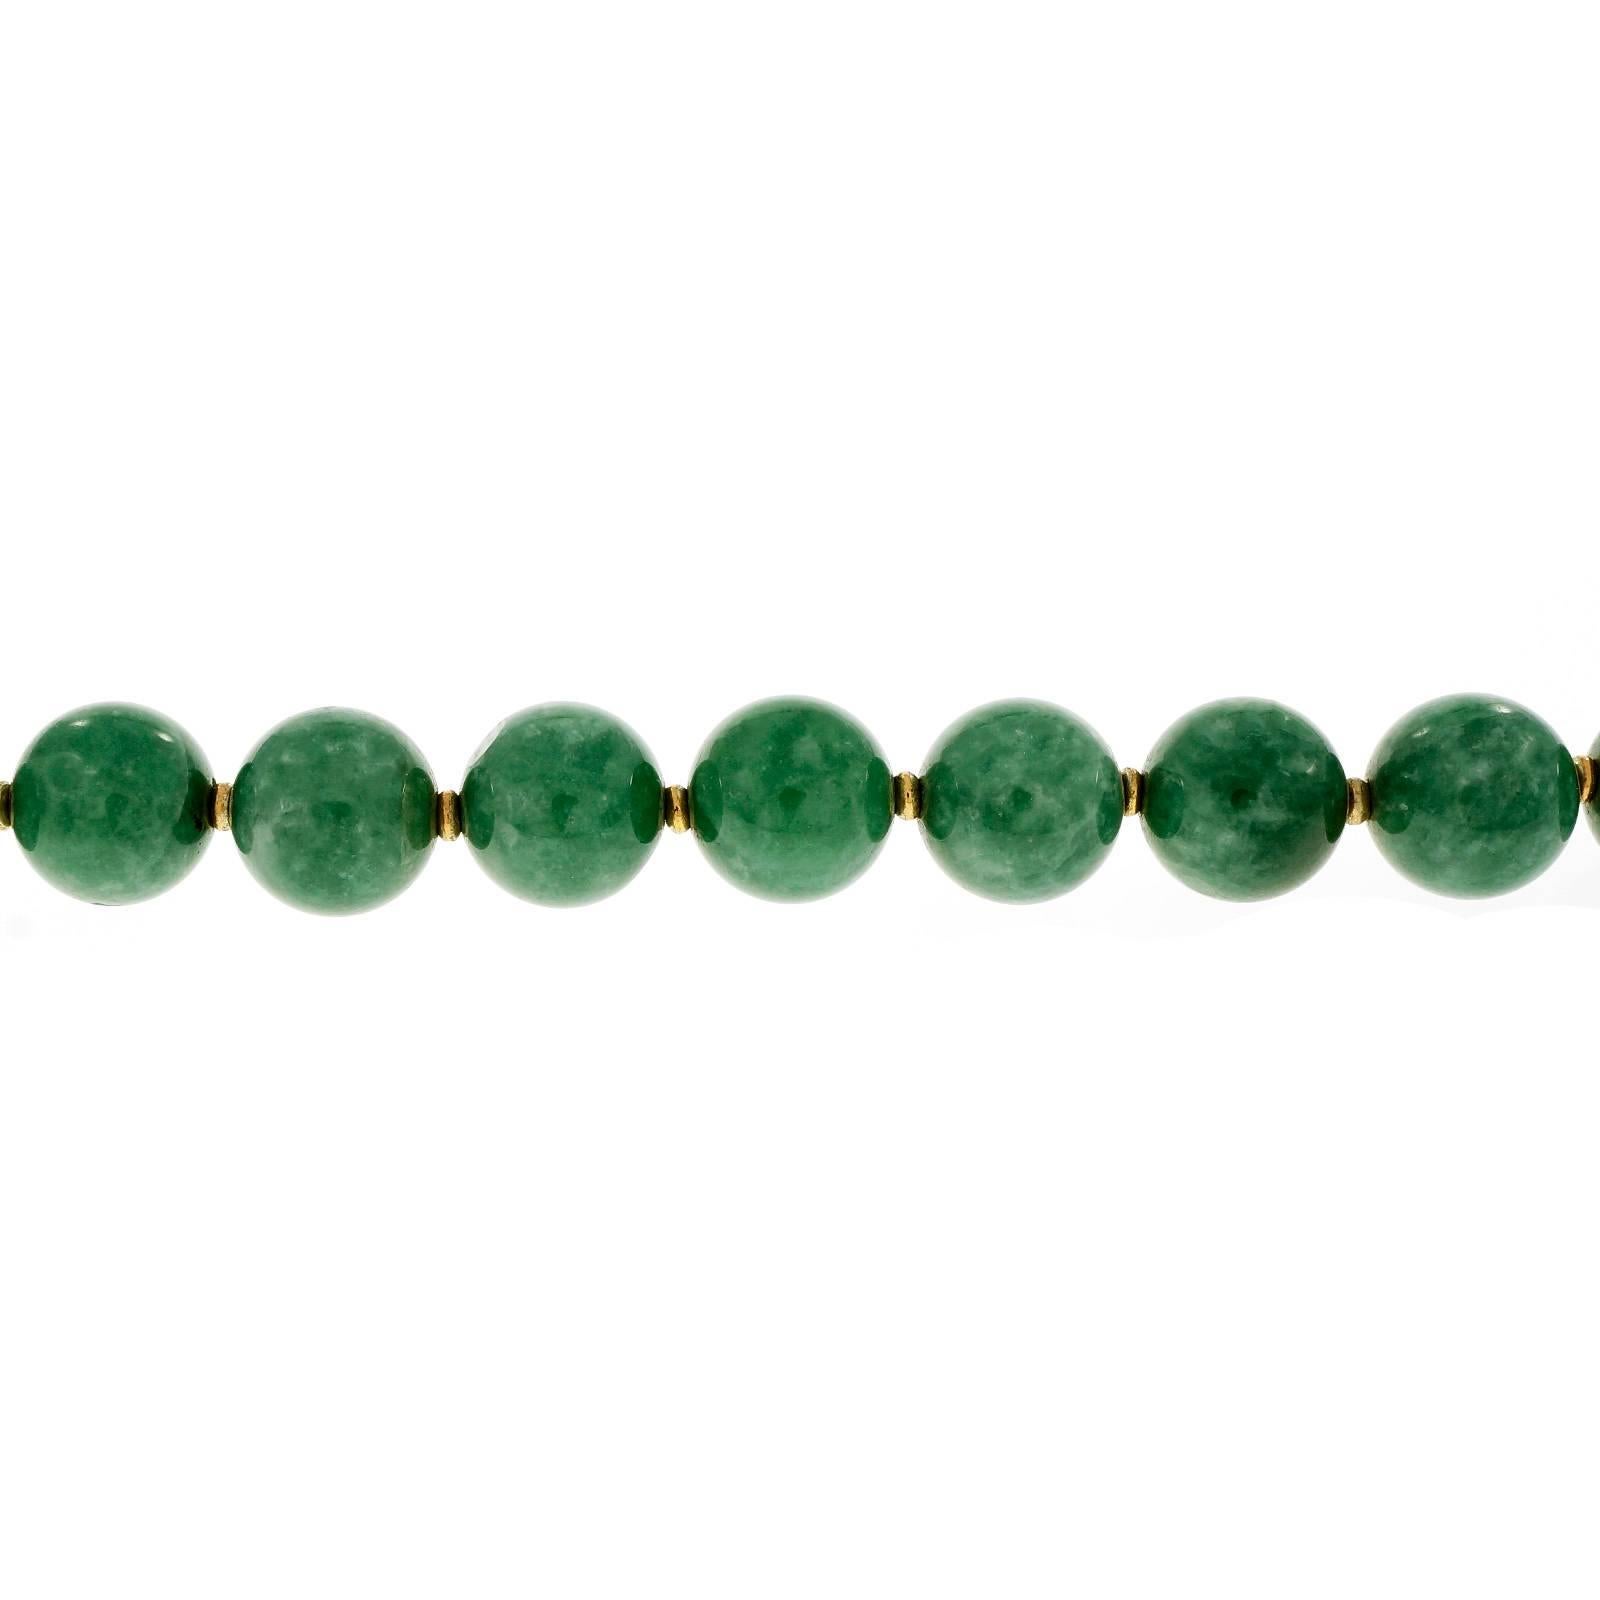 Large Jadeite Jade bead necklace GIA certified natural untreated no impregnated polymers. 14k gold spacers. Natural color variation. Full 20 inch length. Circa 1950.

1 oval cabochon Jadeite Jade, 16.0 x 11.66mm
33 round natural bead Jadeite